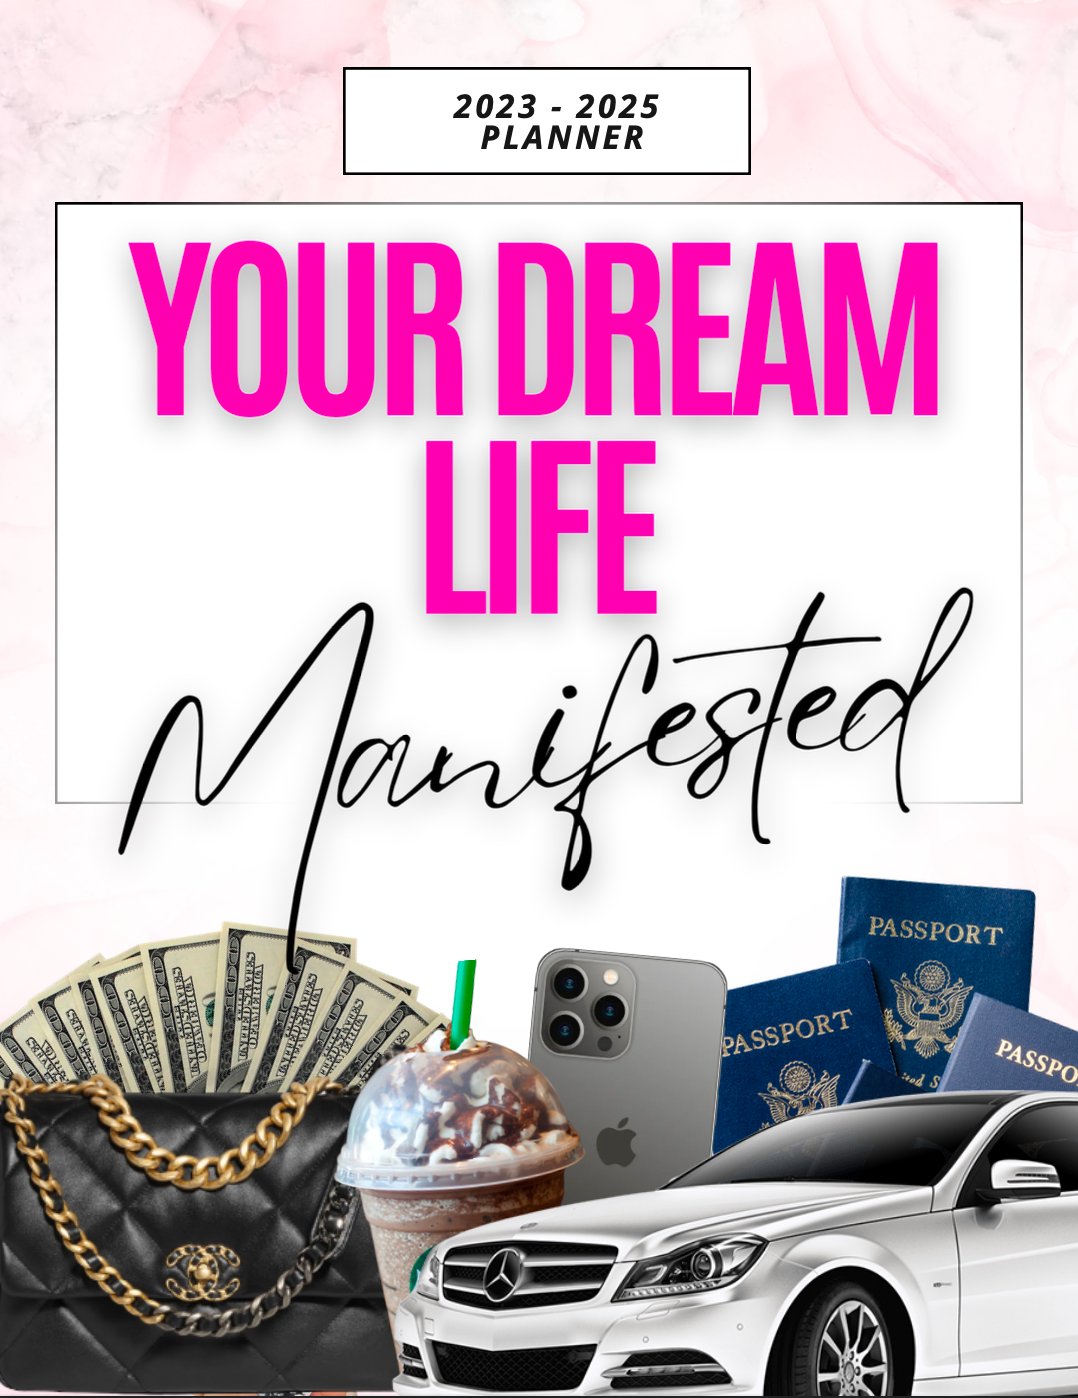 Your Dream Life Manifested Planner